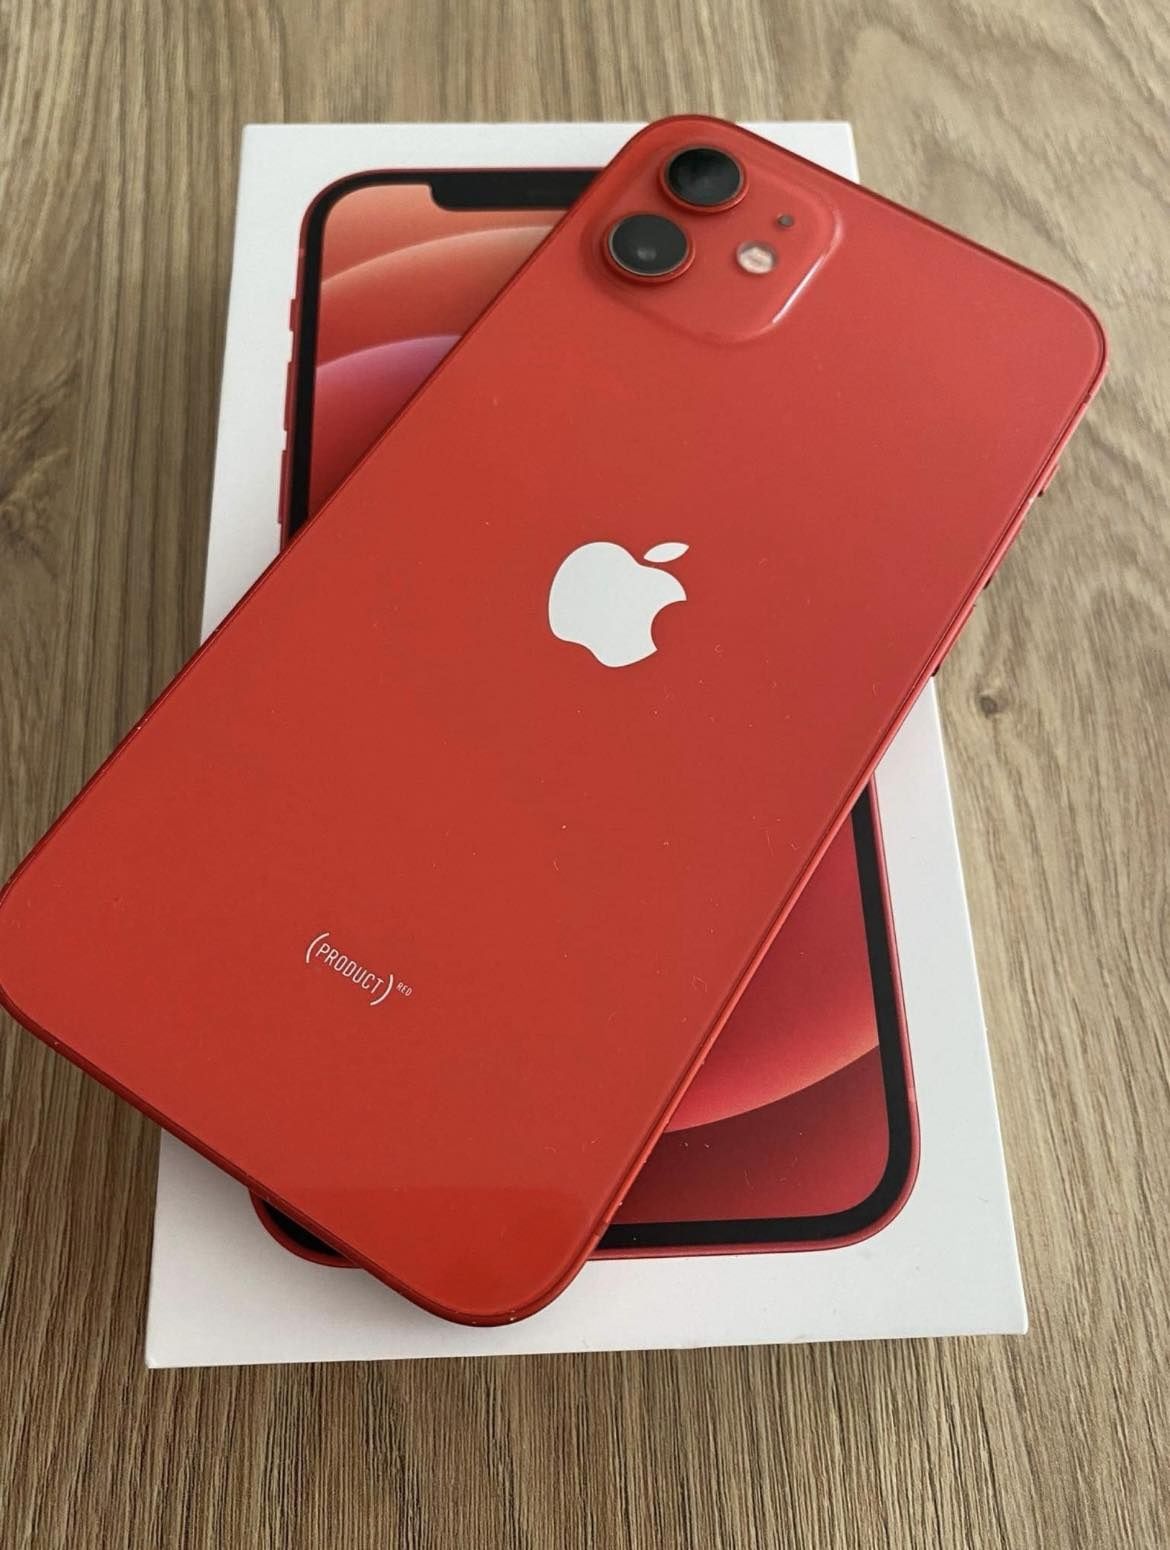 IPhone 12 64gb red